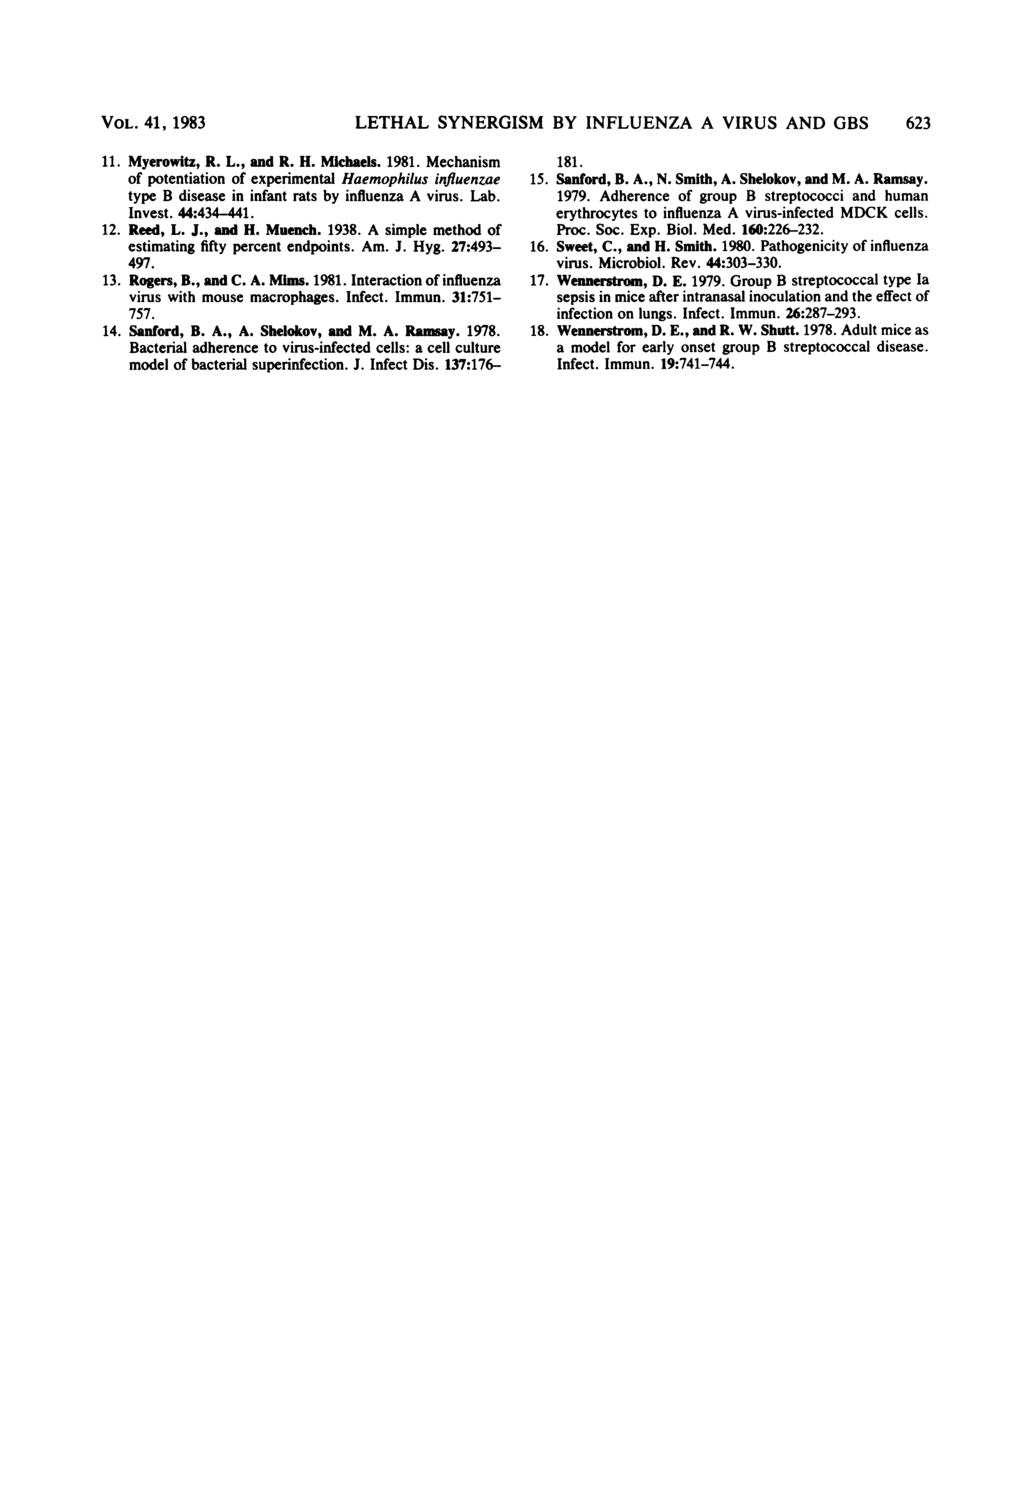 VOL. 41, 1983 LETHAL SYNERGISM BY INFLUENZA A VIRUS AND GBS 623 11. Myerowitz, R. L., and R. H. Mlchaels. 1981.